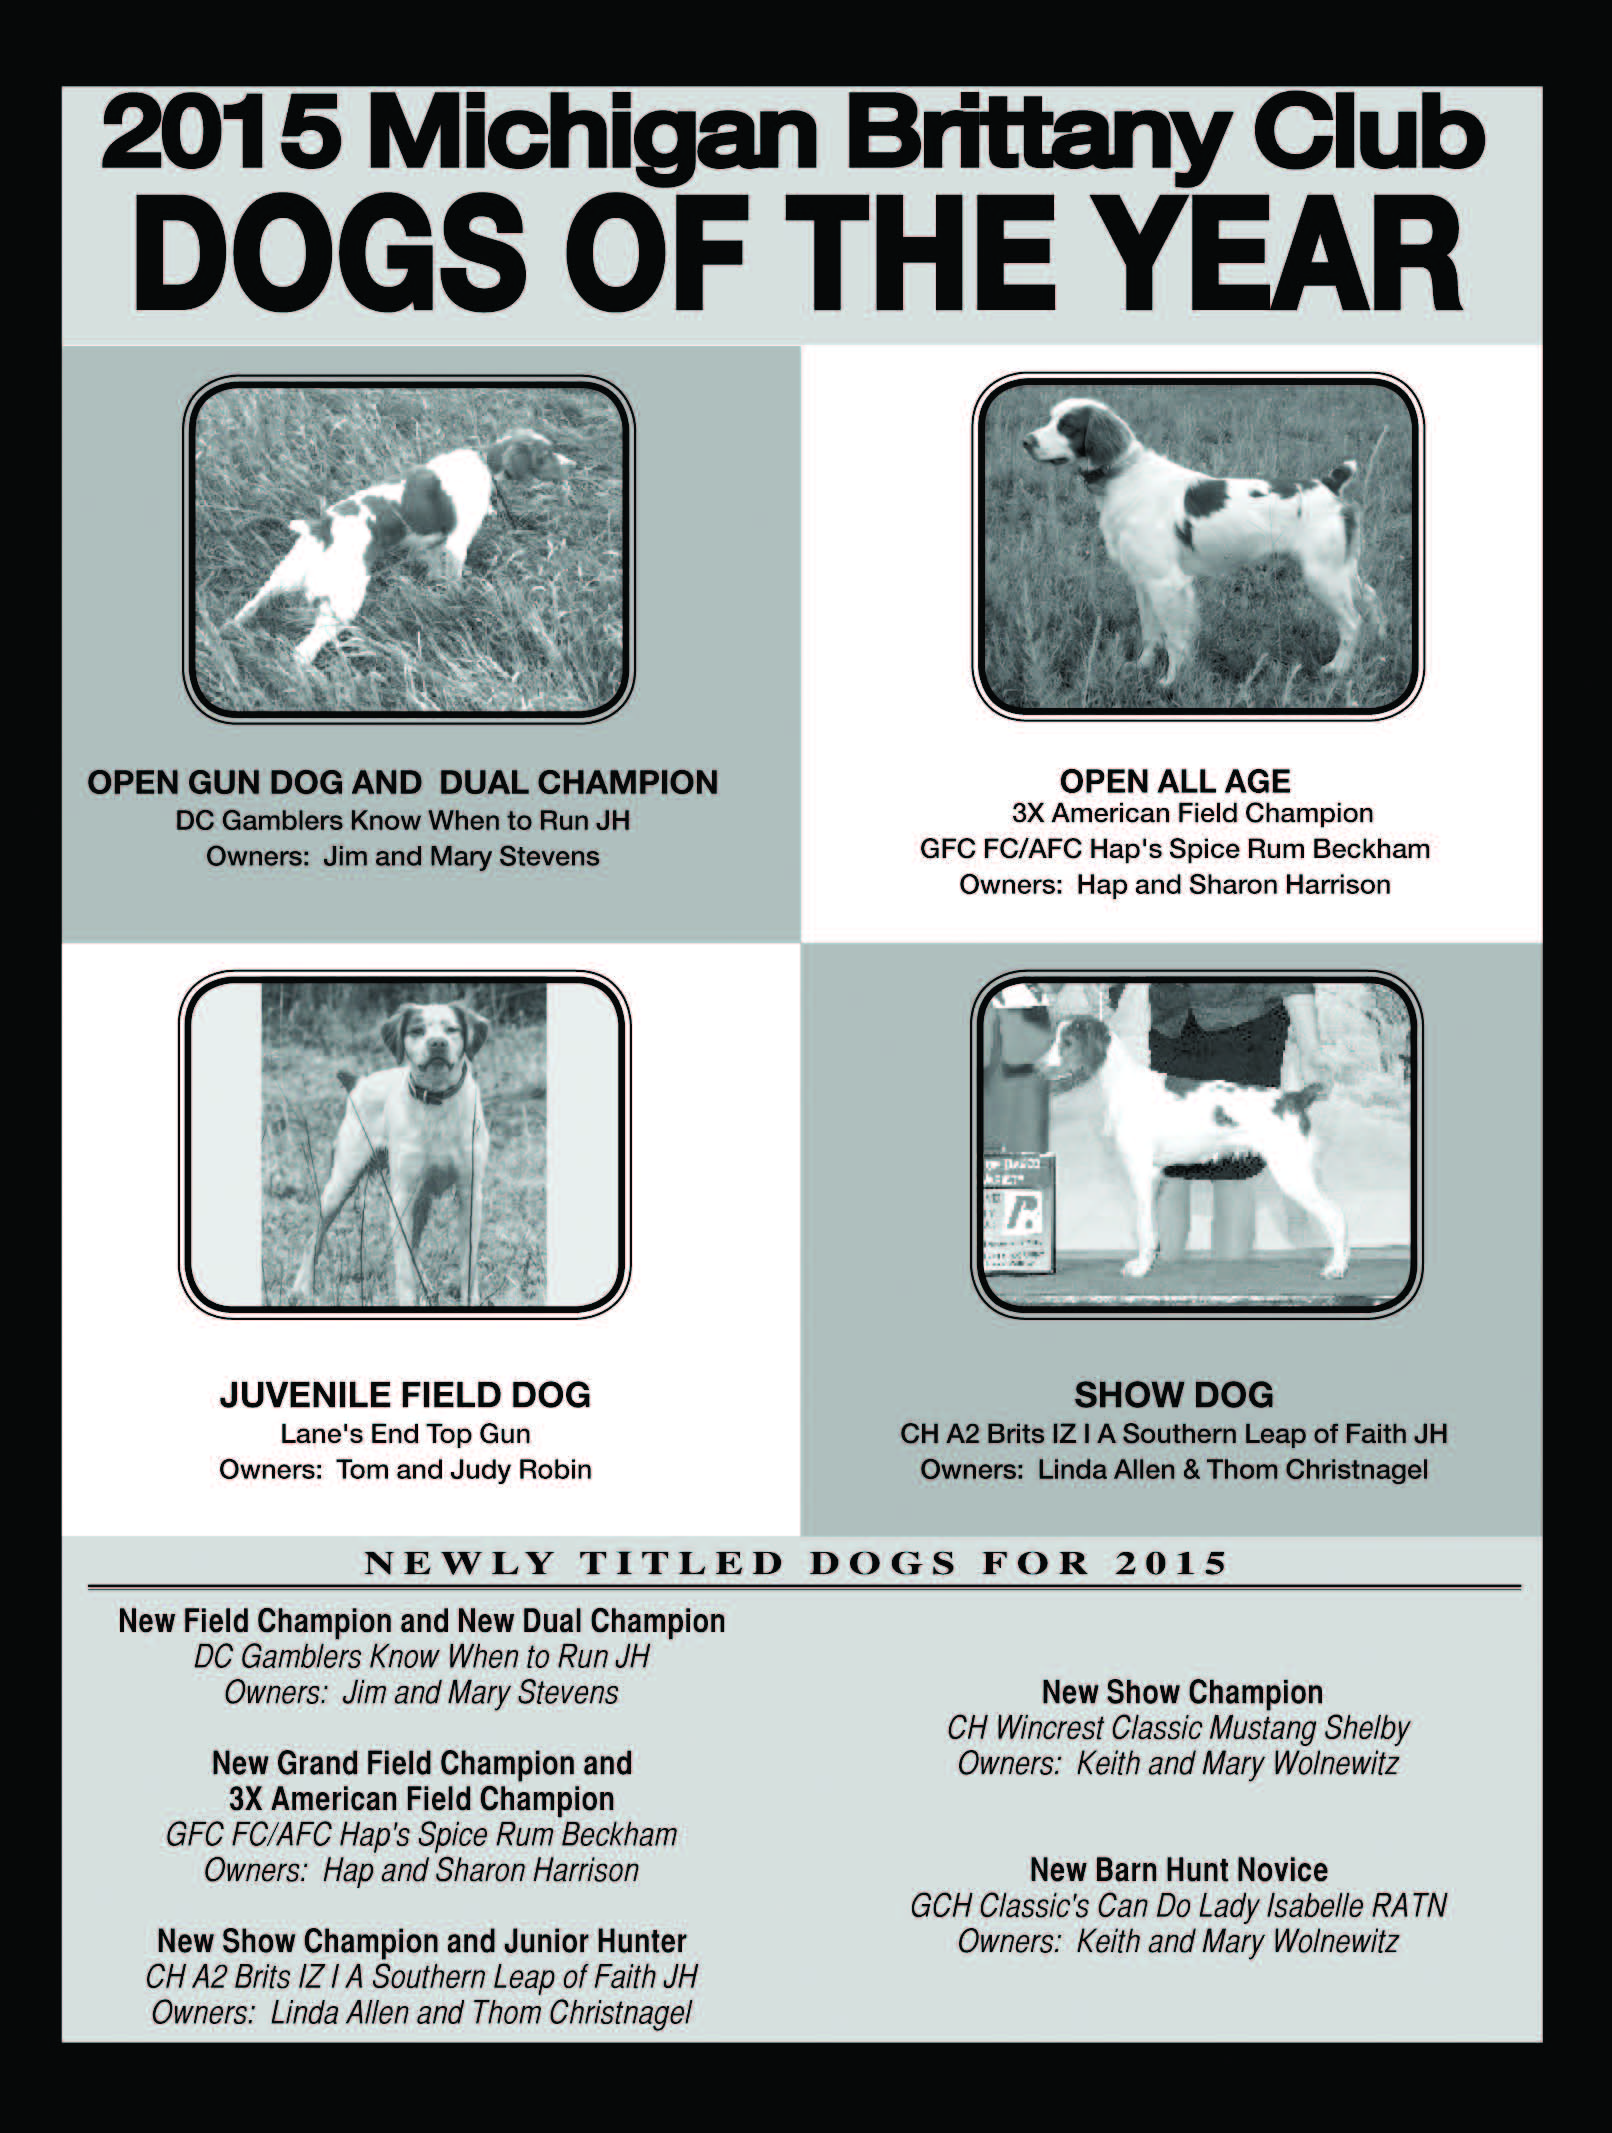 MBC Dogs of the Year 2015